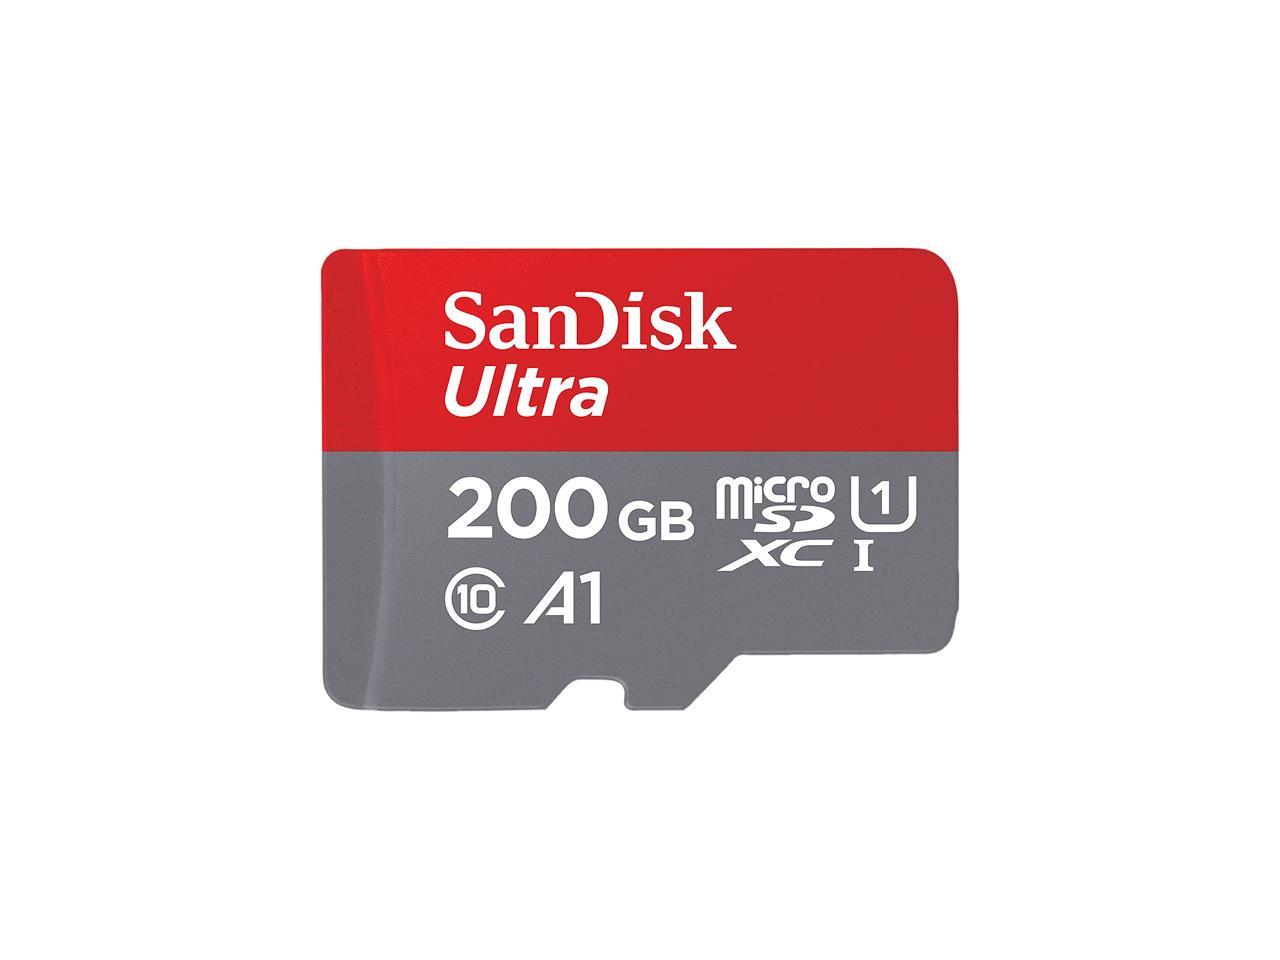 SanDisk Ultra 200GB MicroSDXC Verified for Spice Mobile Mi-502n by SanFlash 100MBs A1 U1 C10 Works with SanDisk 